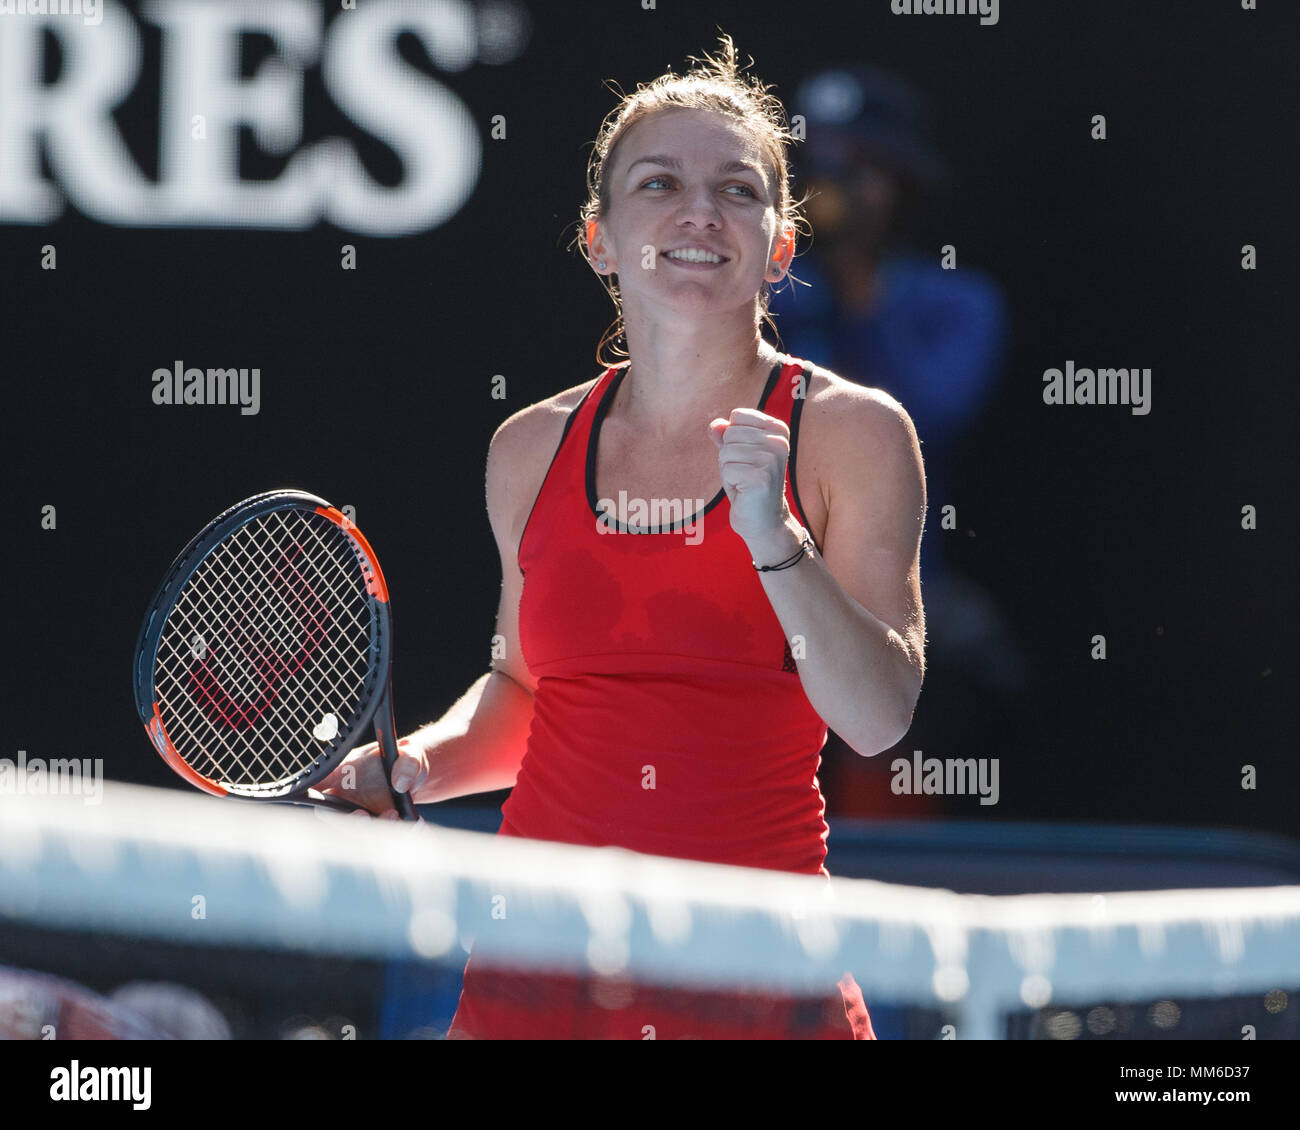 Roumanian tennis player Simona Halep making a fist and cheering during women's  singles match in Australian Open 2018 Tennis Tournament, Melbourne Par  Stock Photo - Alamy